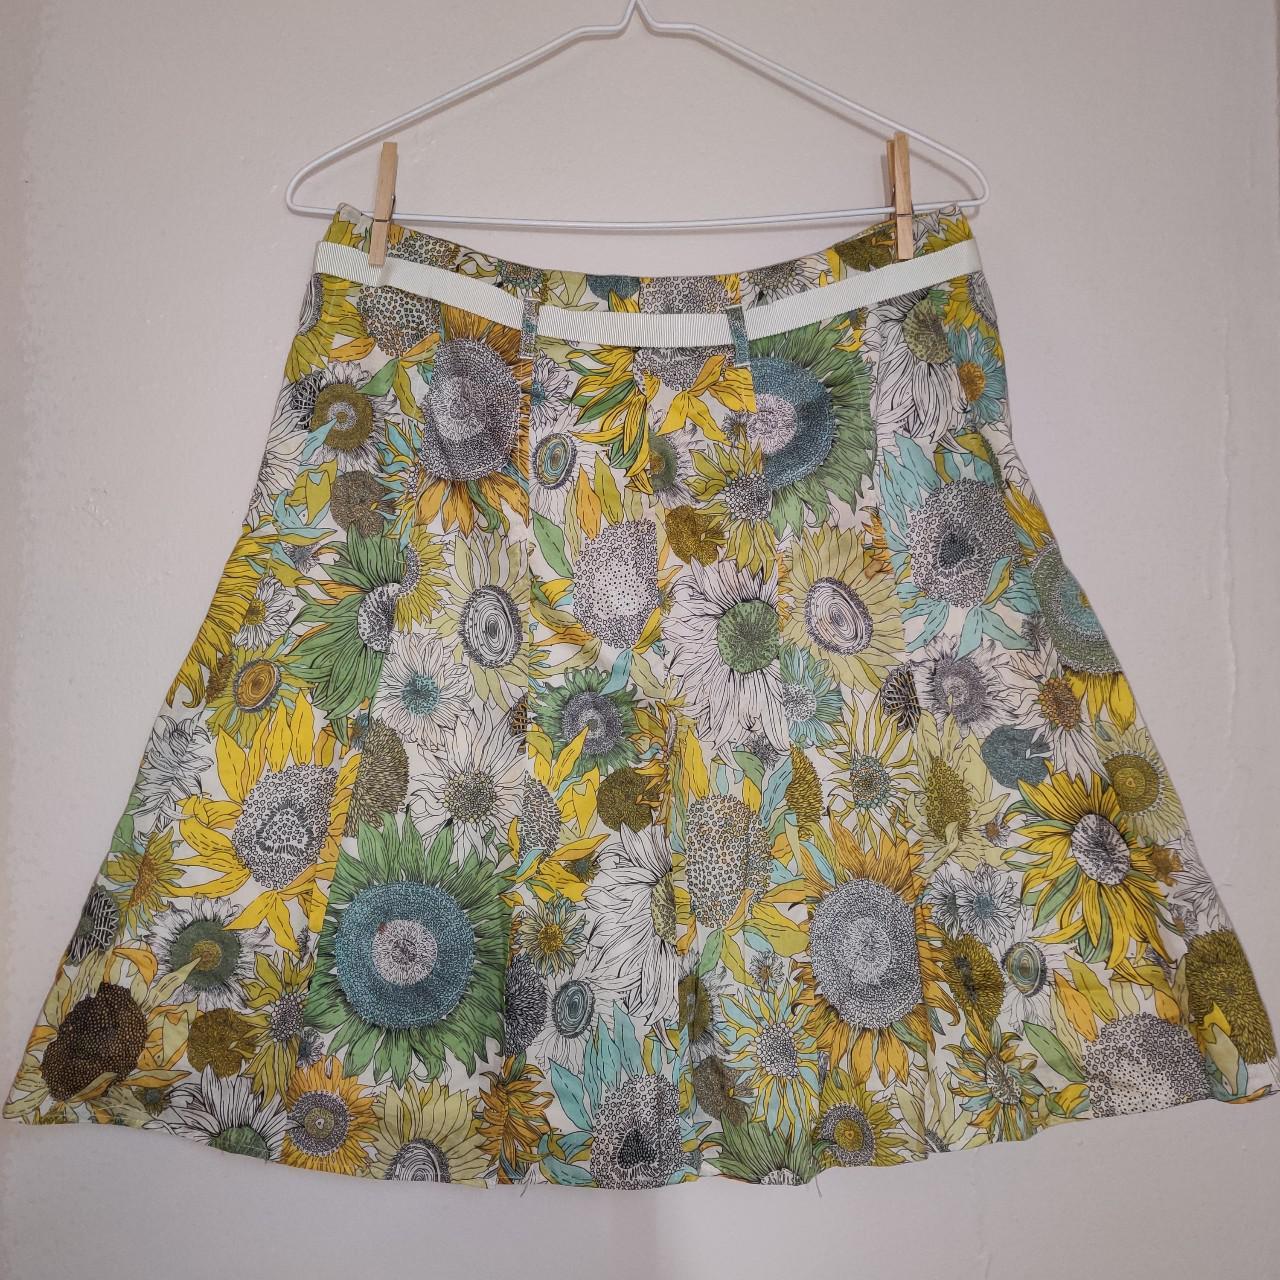 Product Image 1 - J. Crew Yellow/Green Floral Print